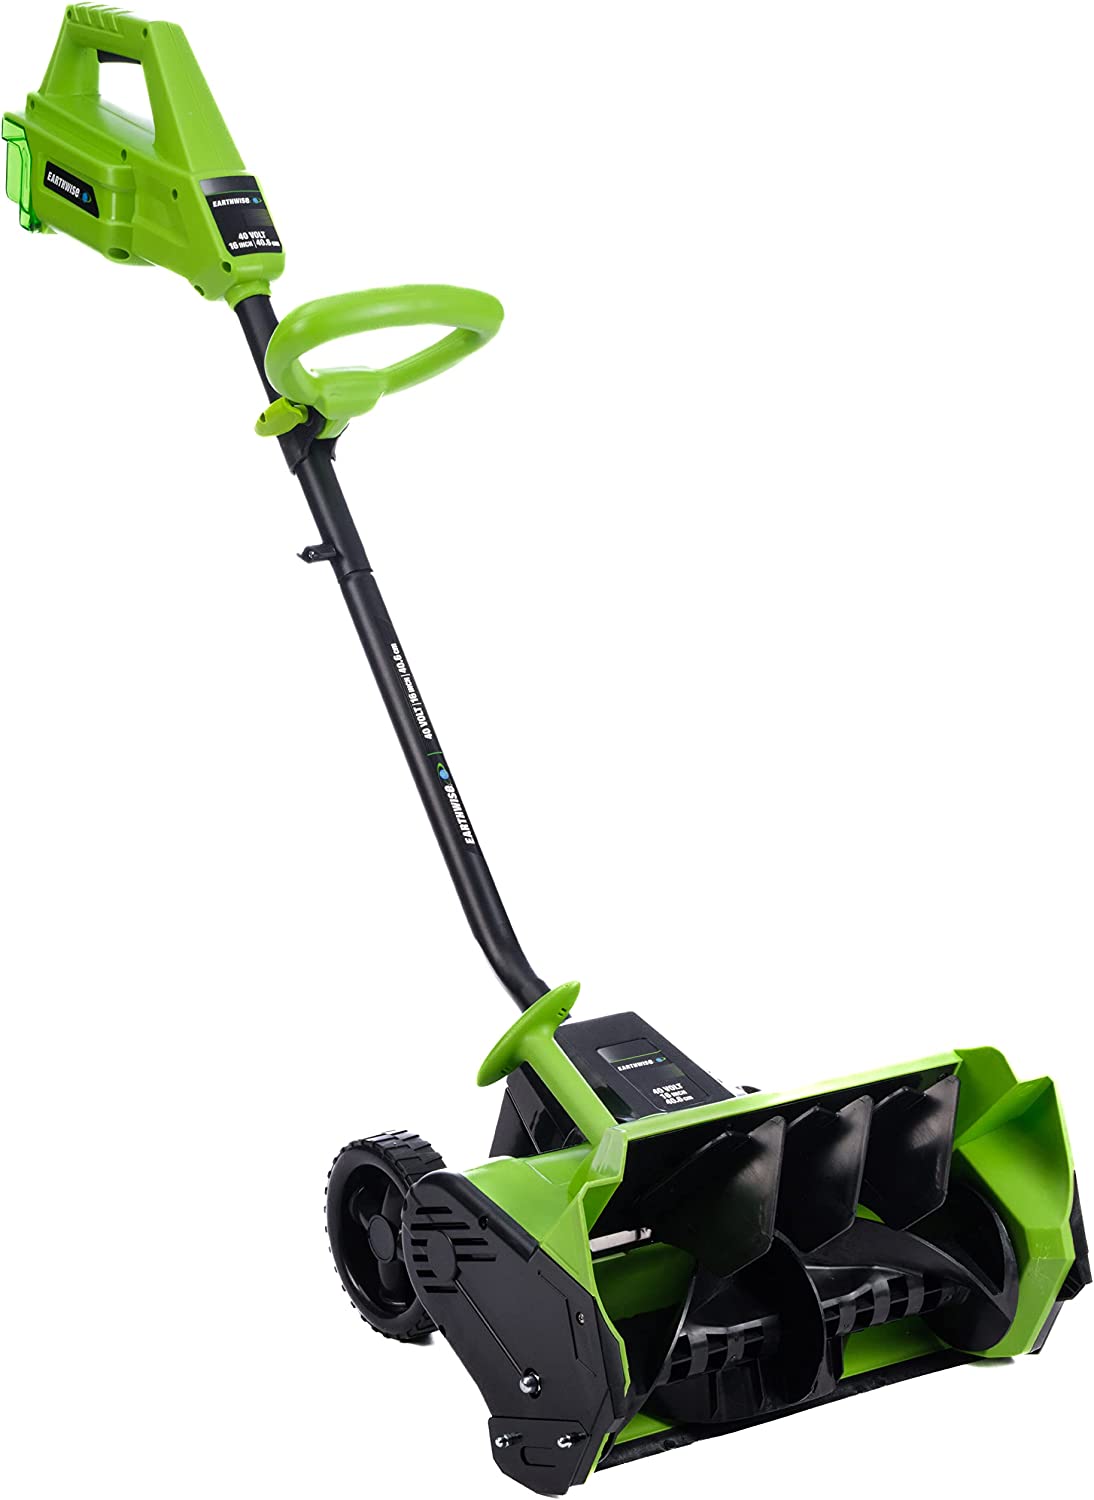 Earthwise SN74016 40V Lithium Battery Operated Ion Cordless 16" Snow Shovel with Brushless Motor - image 1 of 10